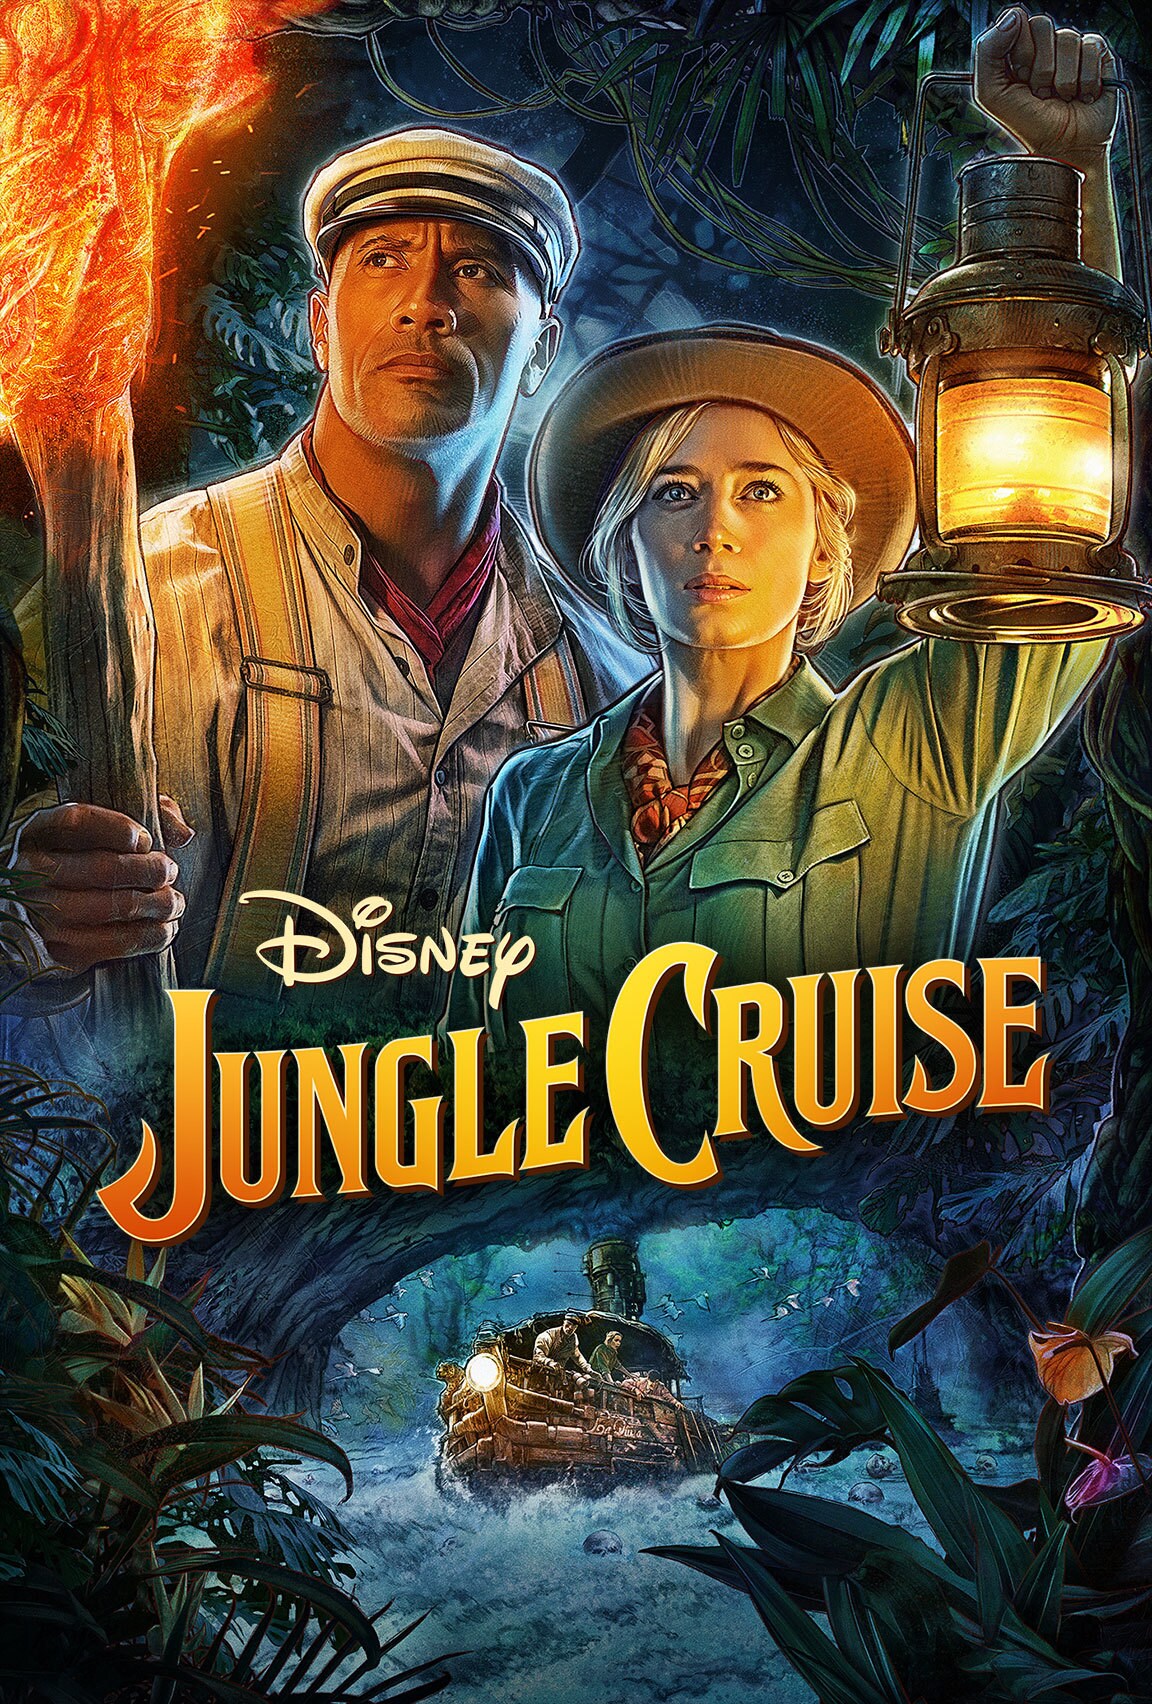 Dwayne Johnson and Emily Blunt in Jungle Cruise on Disney Plus